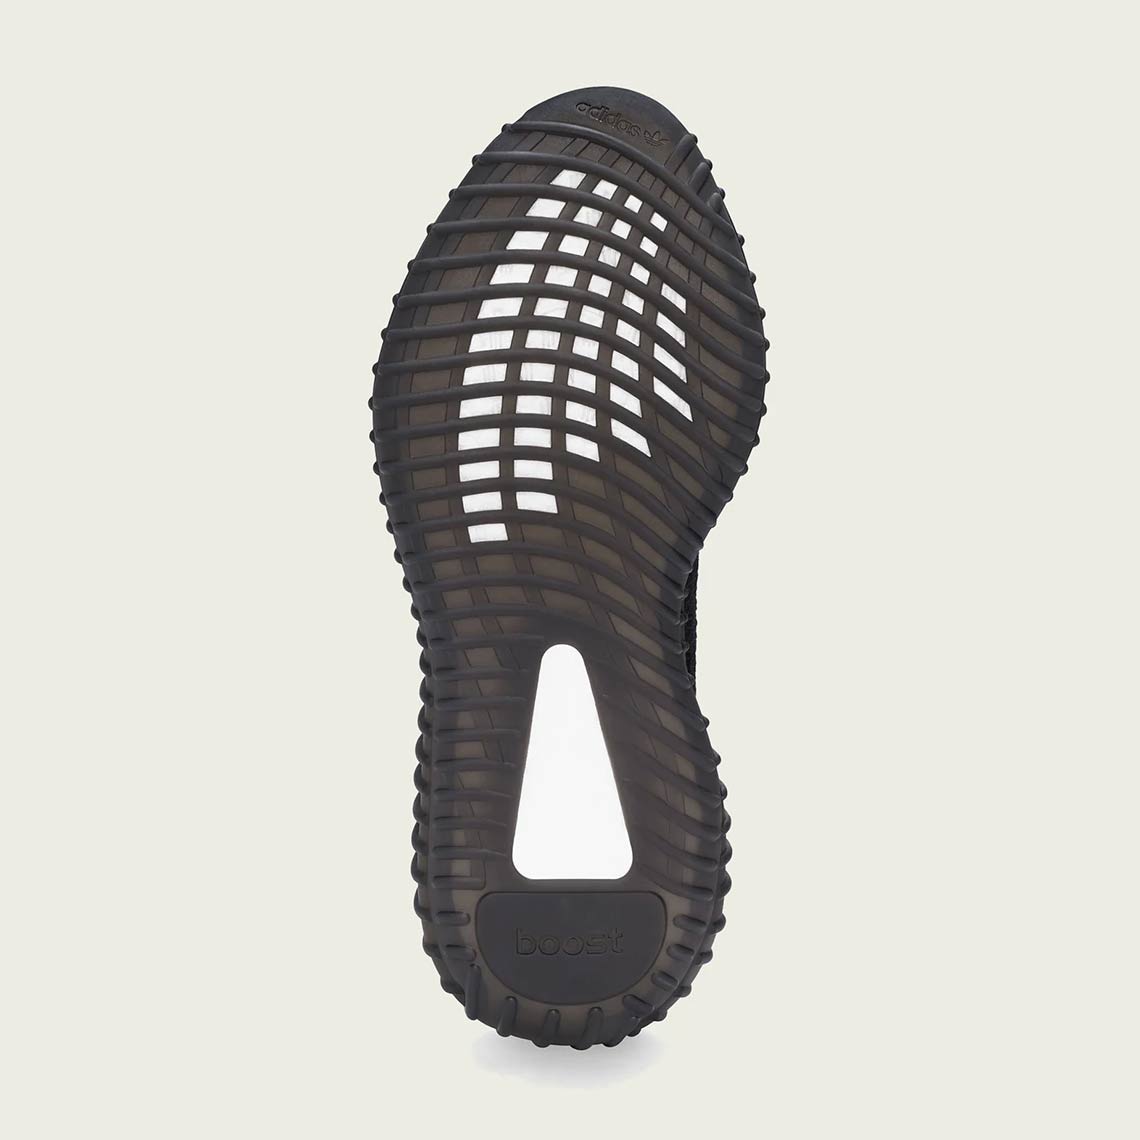 yeezy boost 350 drop time